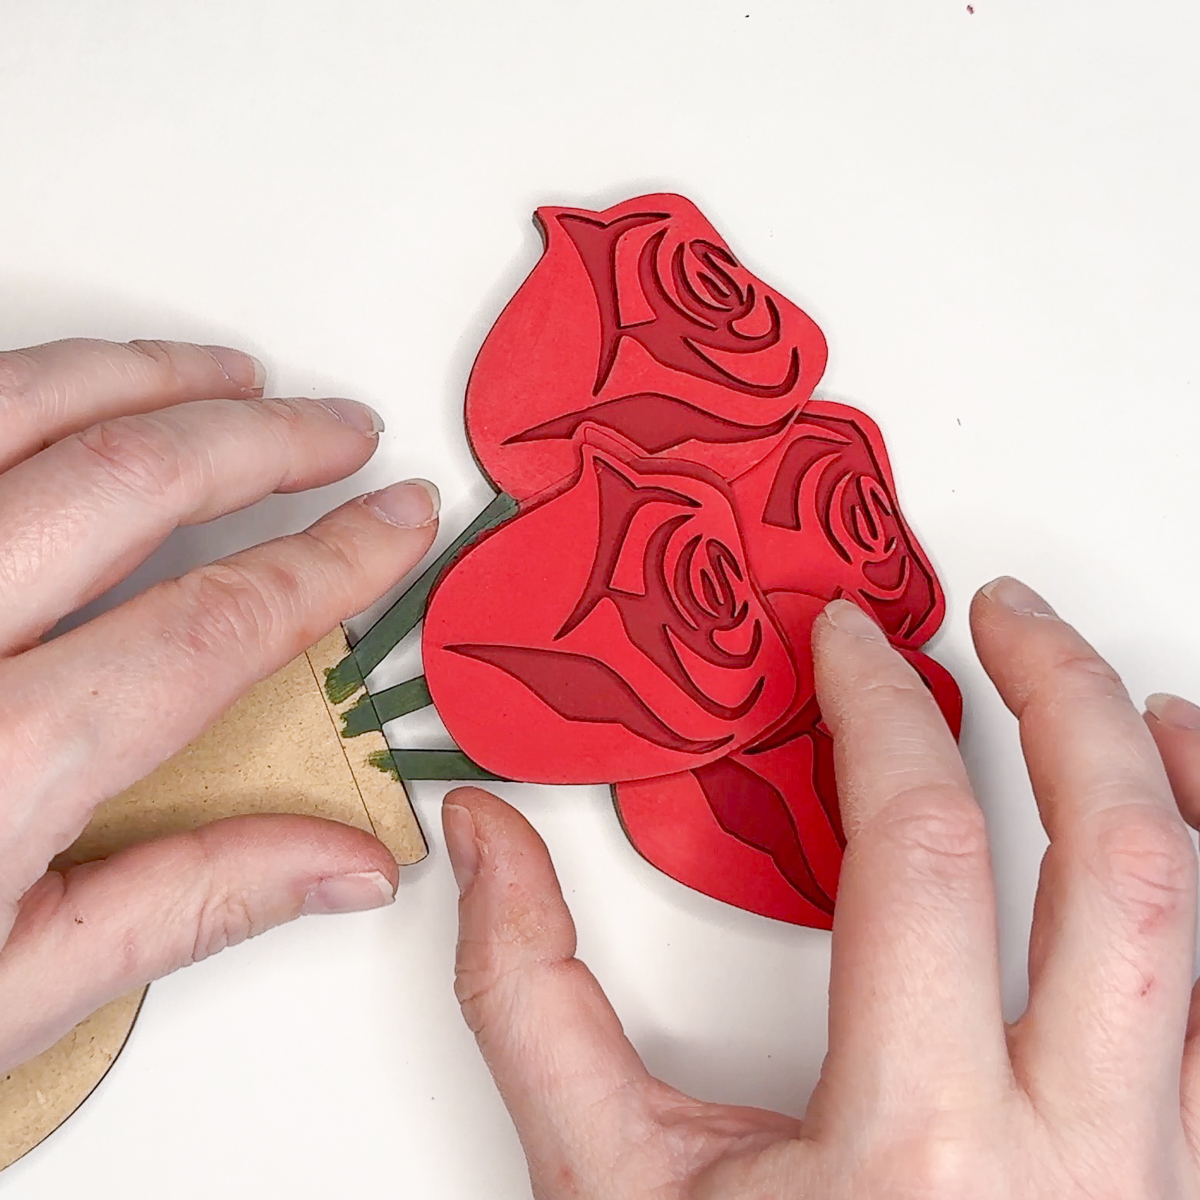 adding the final rose to the bouquet